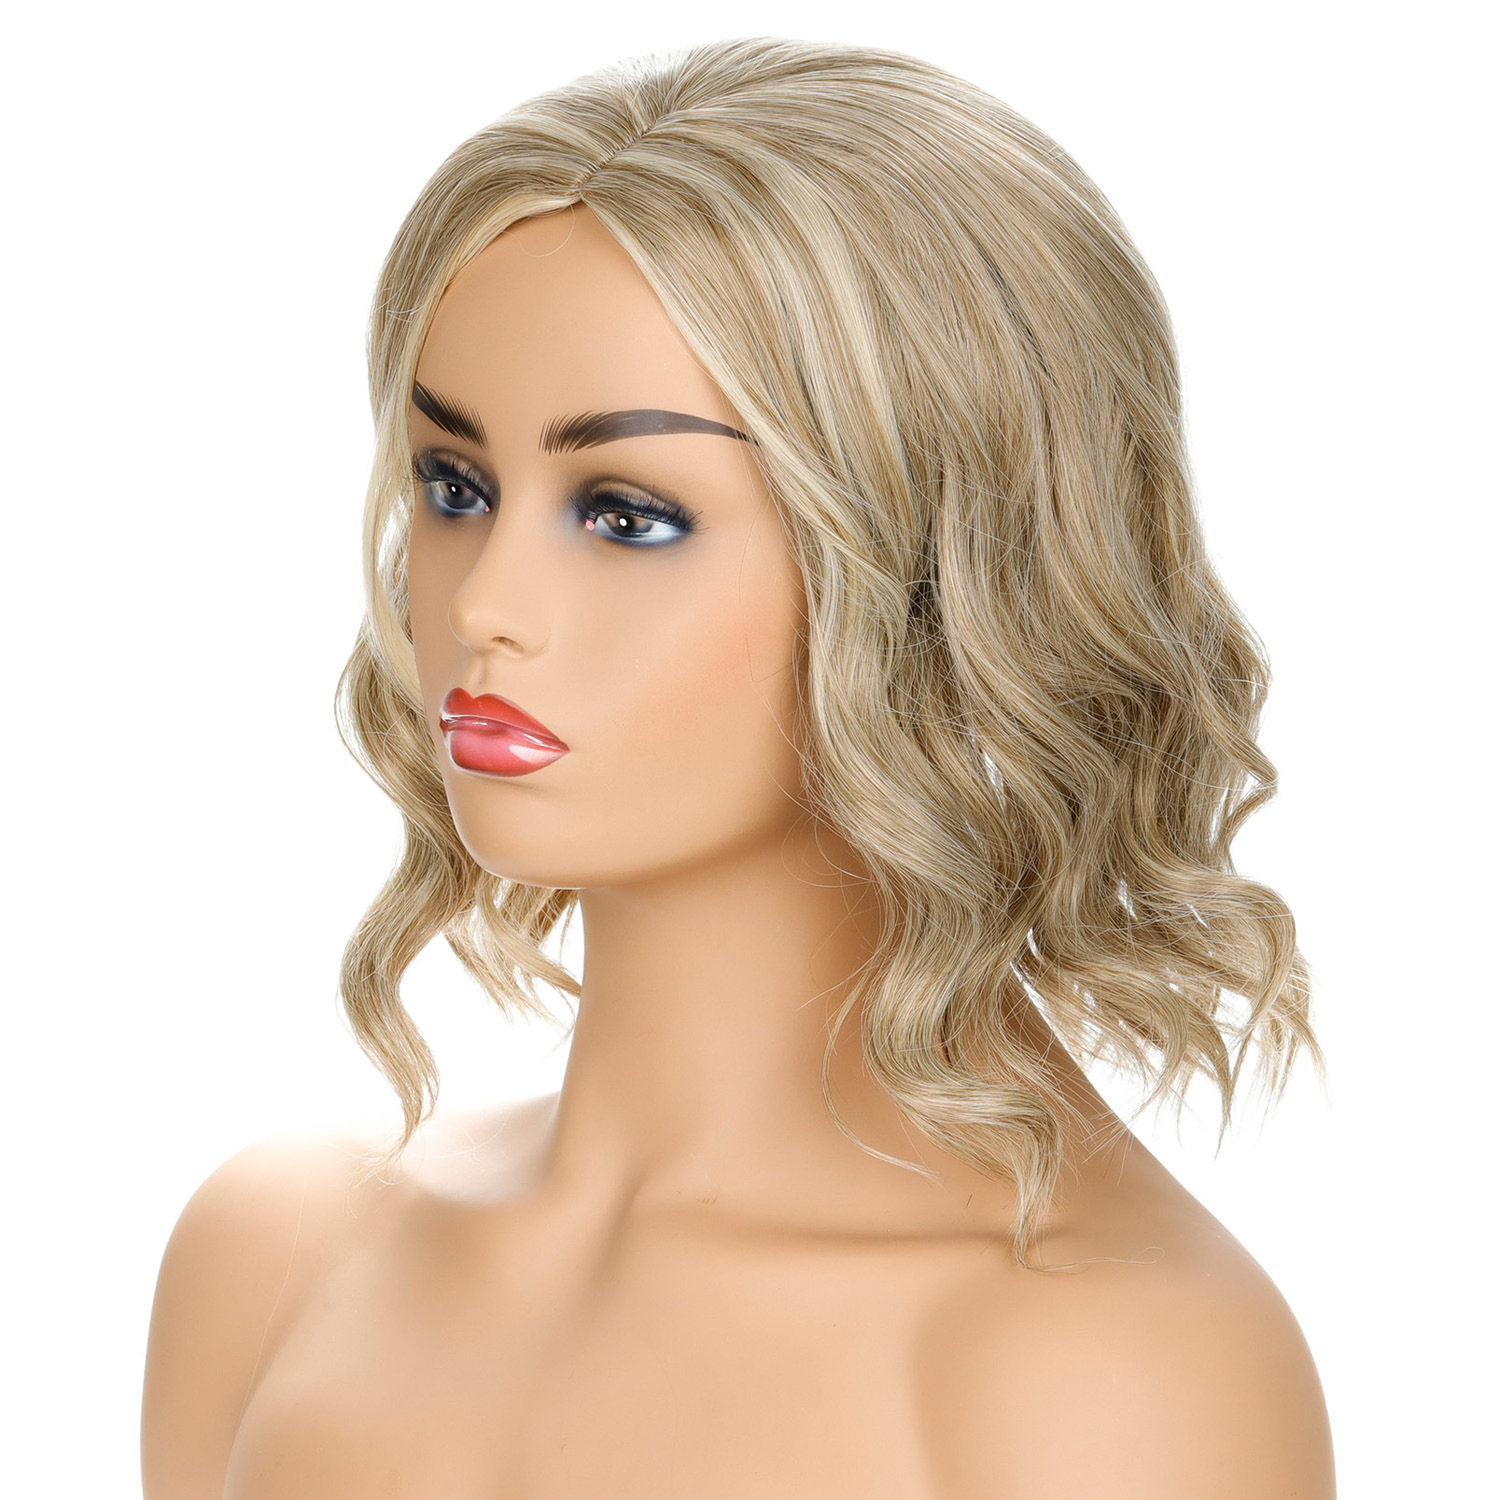 Women's wig in blonde fashion synthetic hair with wavy curly hair and mid-part, a classic choice